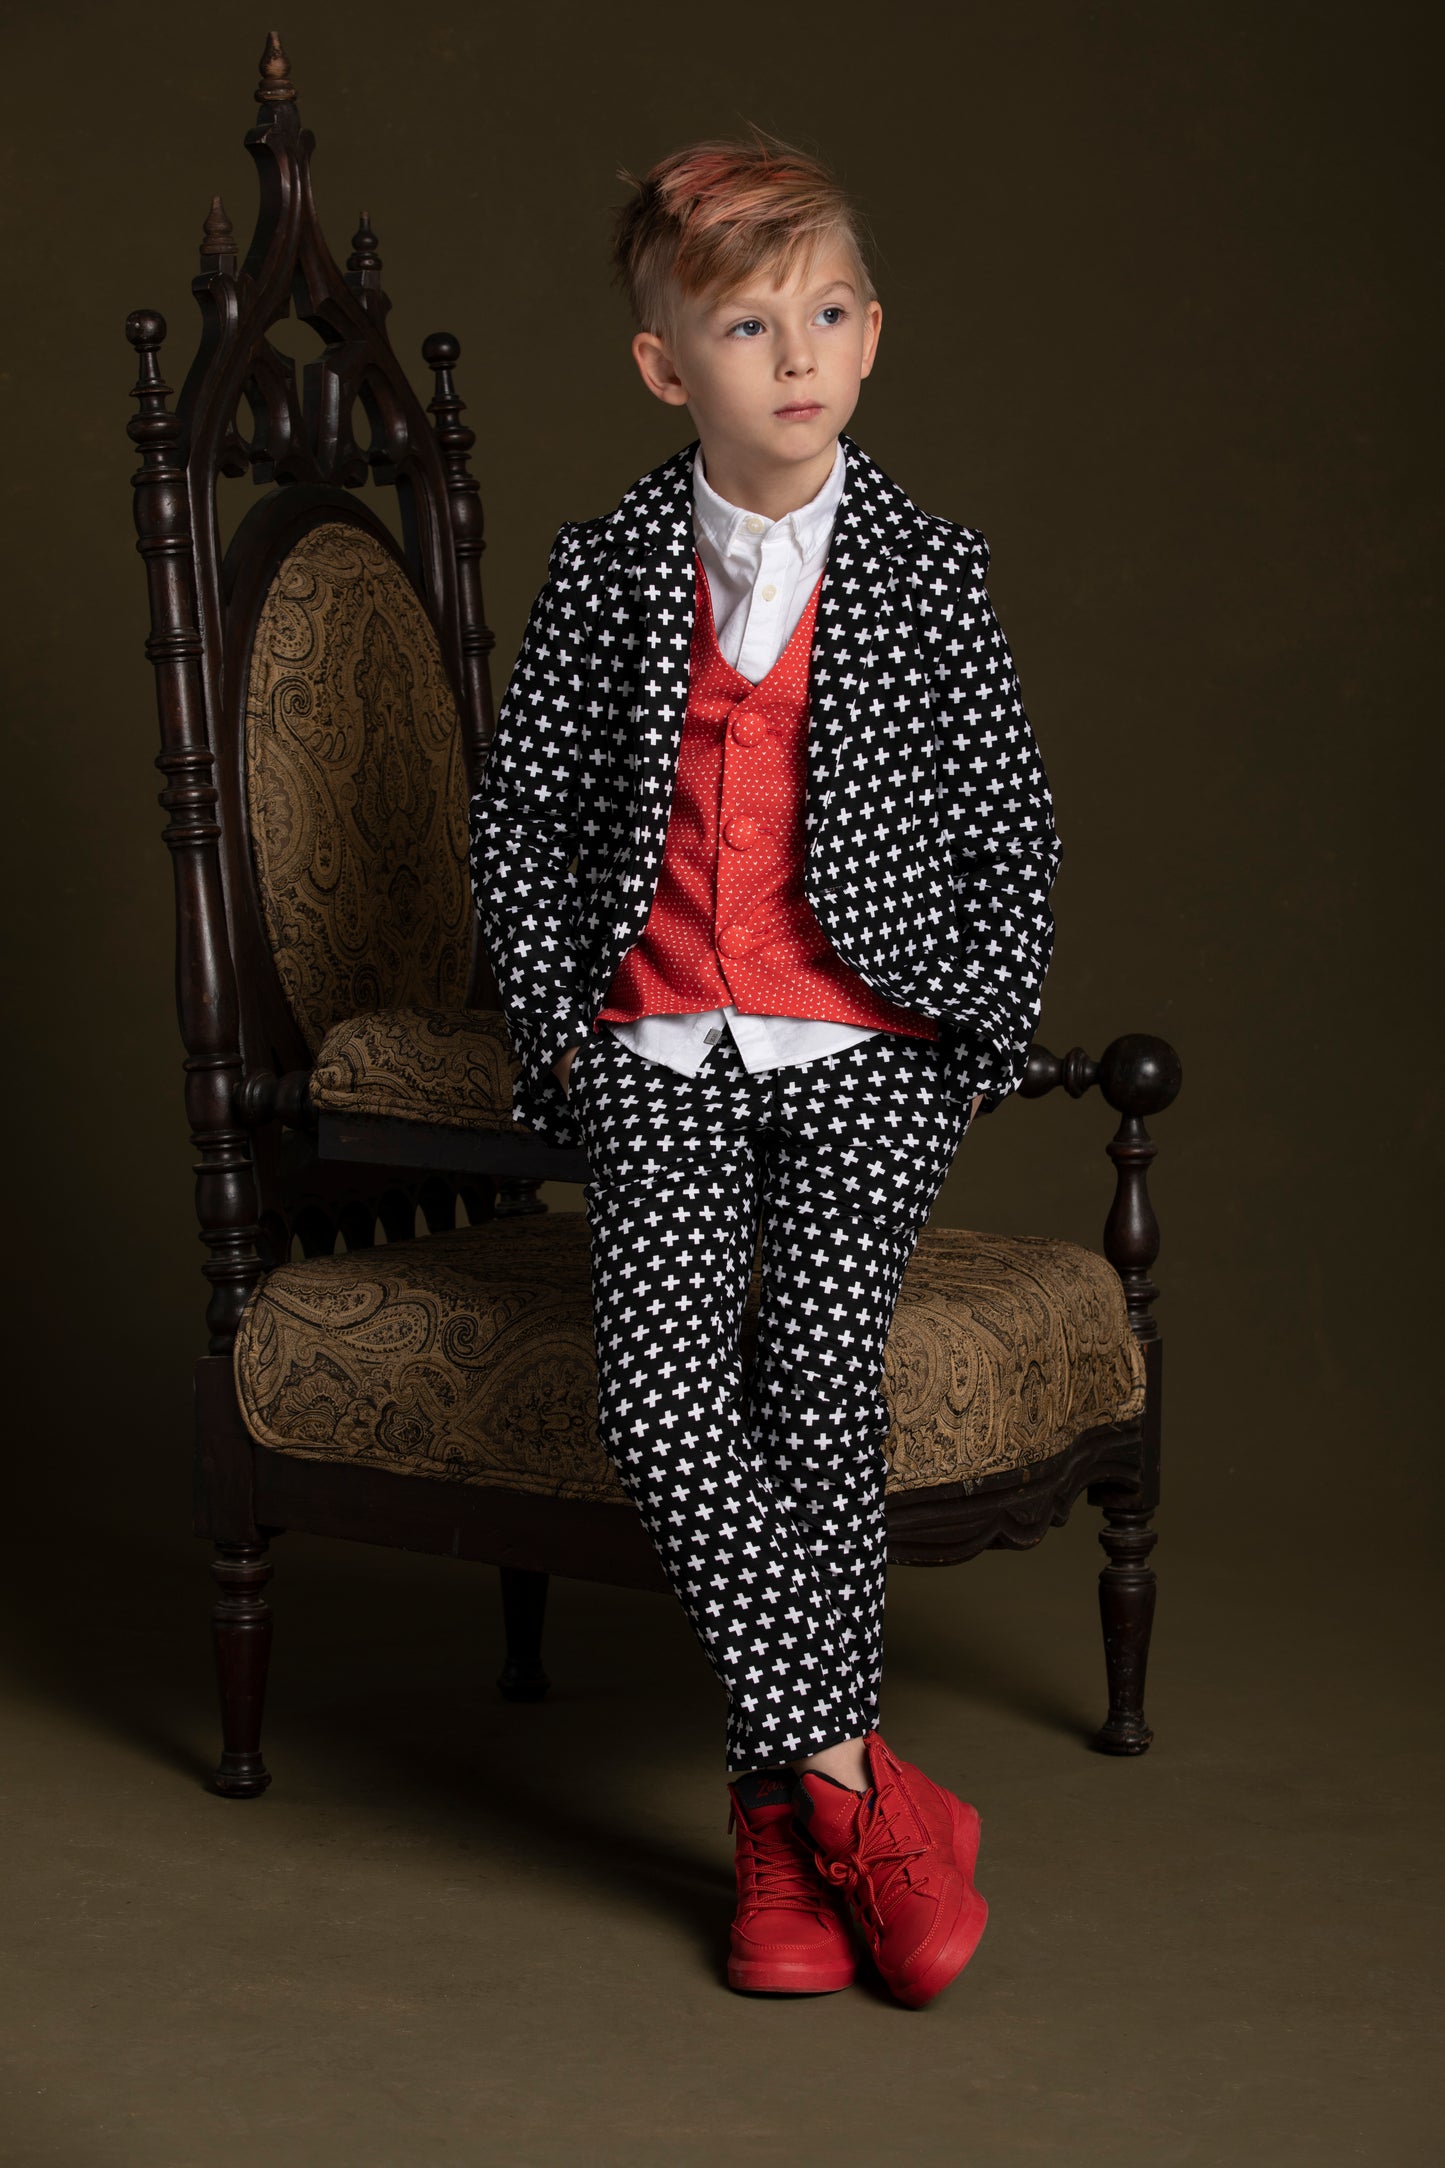 Young man leans against his chair in his red heart suit vest coordinated with the plus print suit